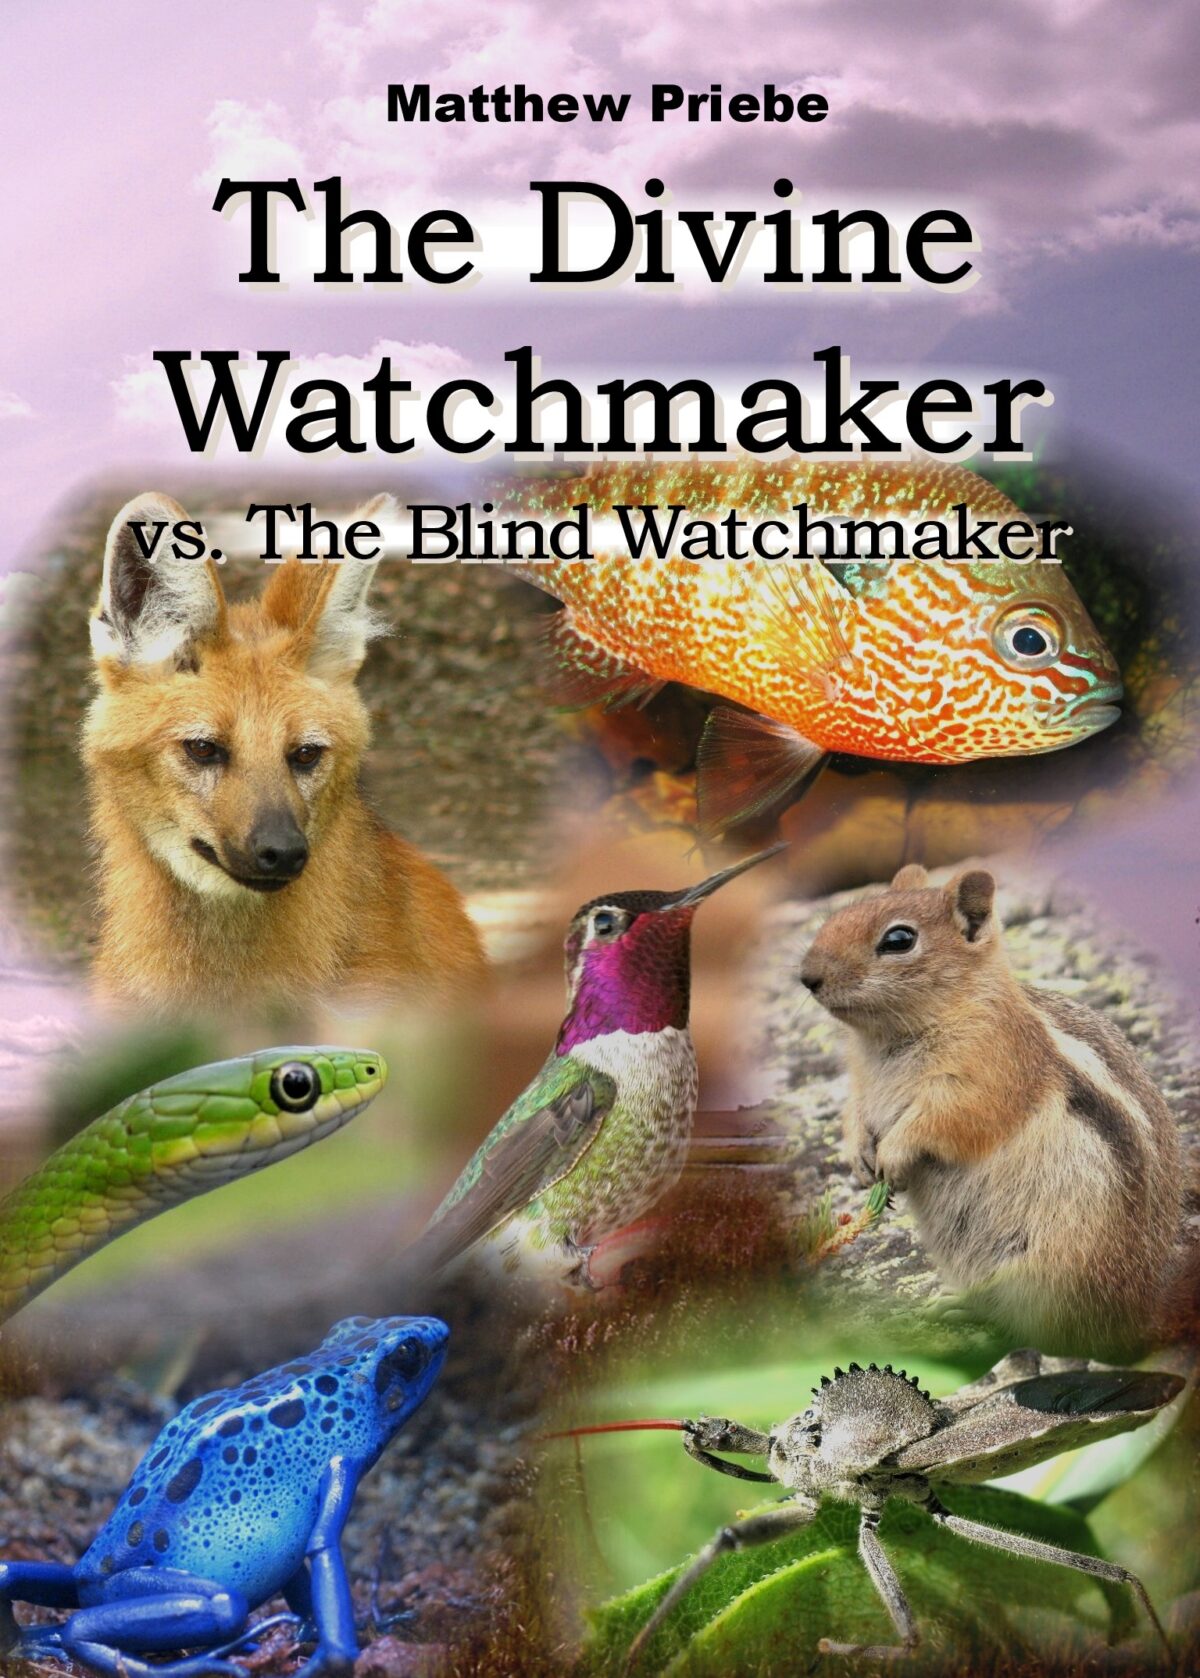 The Divine Watchmaker vs. The Blind Watchmaker Video